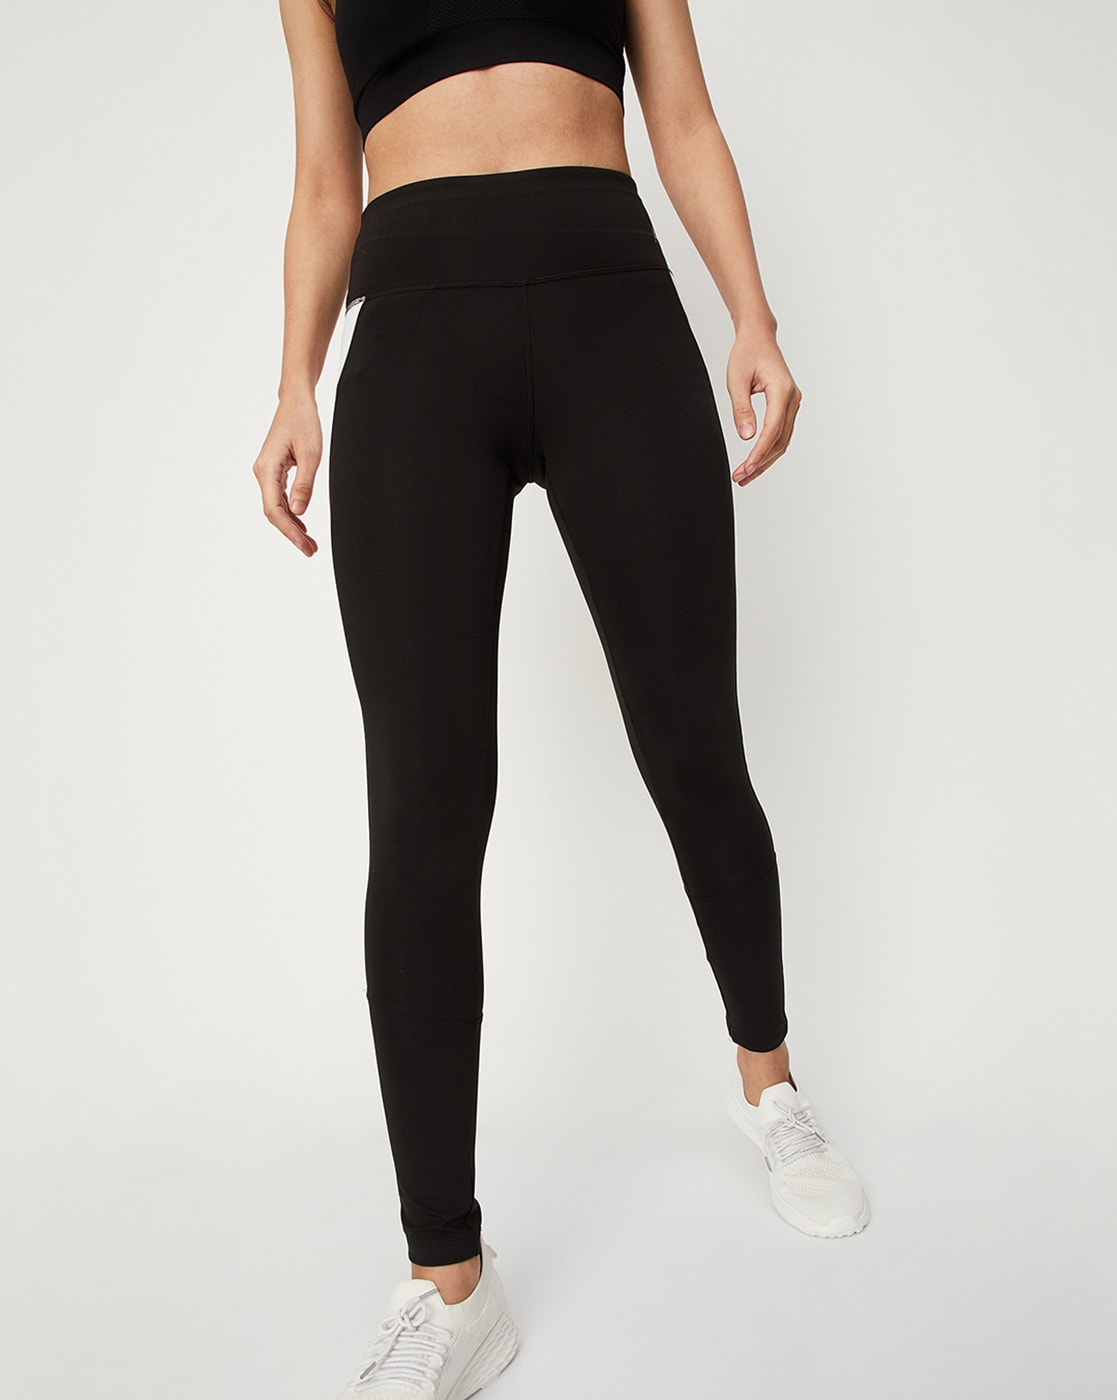 Buy Max Women Jogger Charcoal Online at Lowest Price Ever in India | Check  Reviews & Ratings - Shop The World